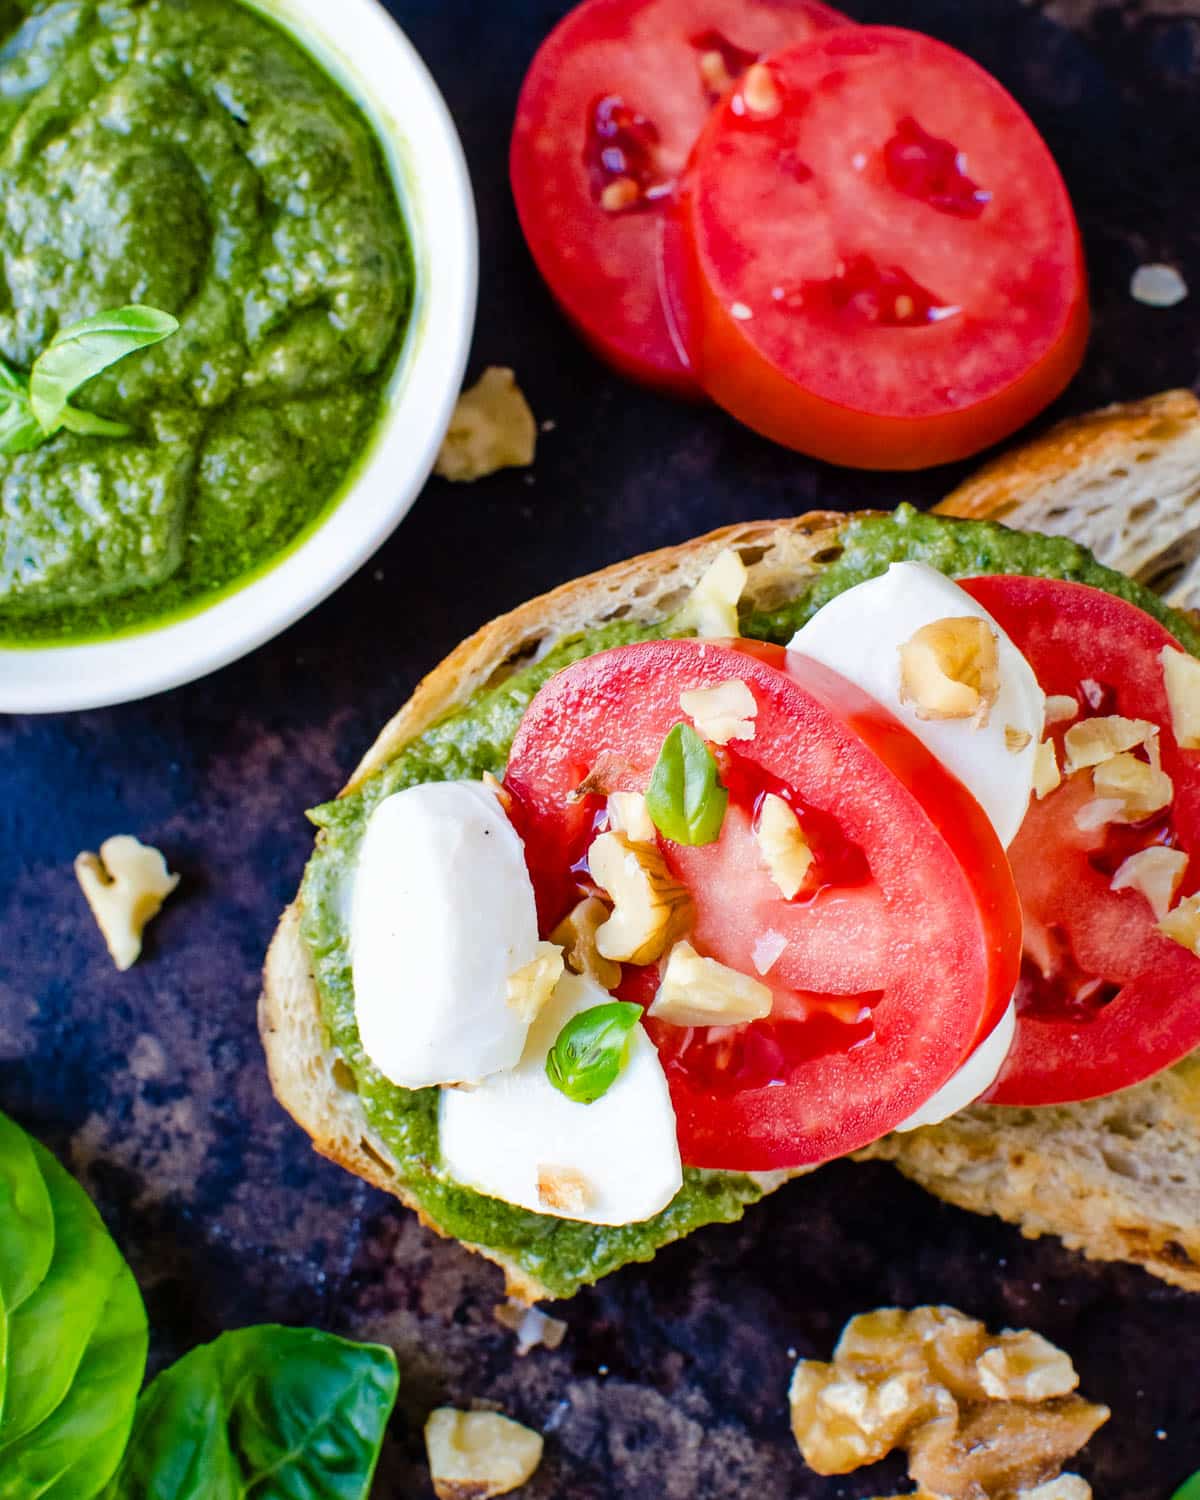 Slathering walnut pesto over grilled toasts and garnishing with cheese and tomato.